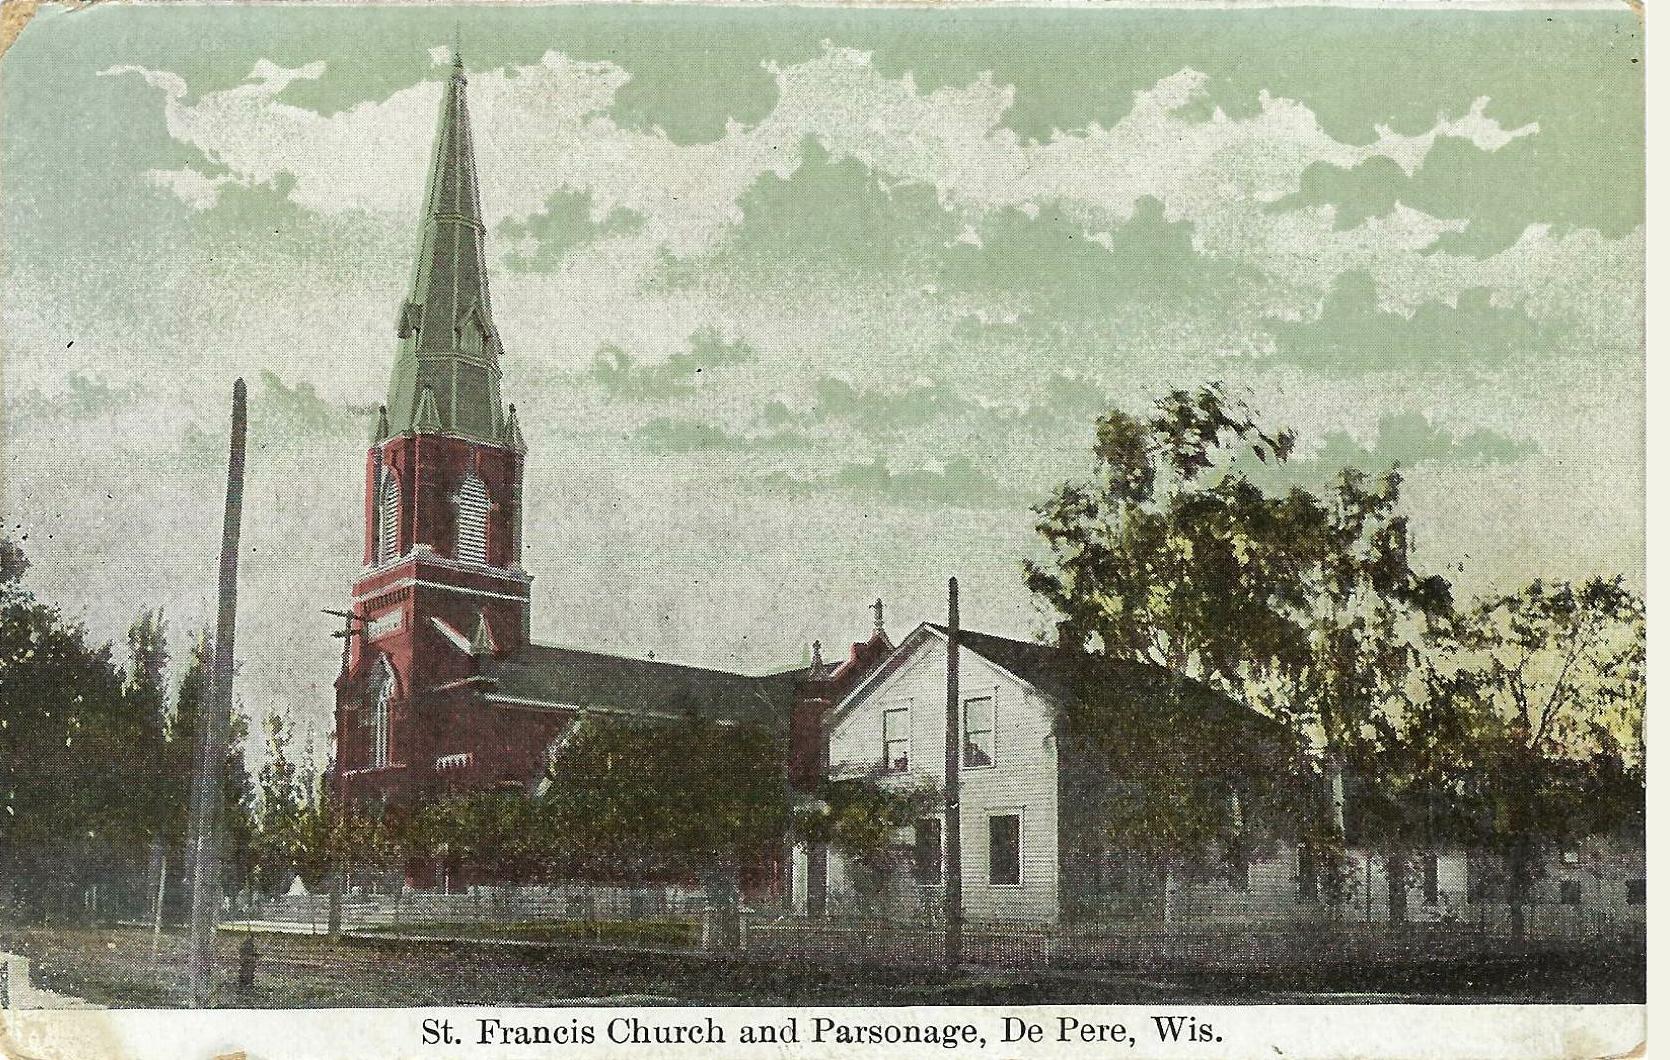 St. Francis Church and Parsonage • UNKNOWN YEAR